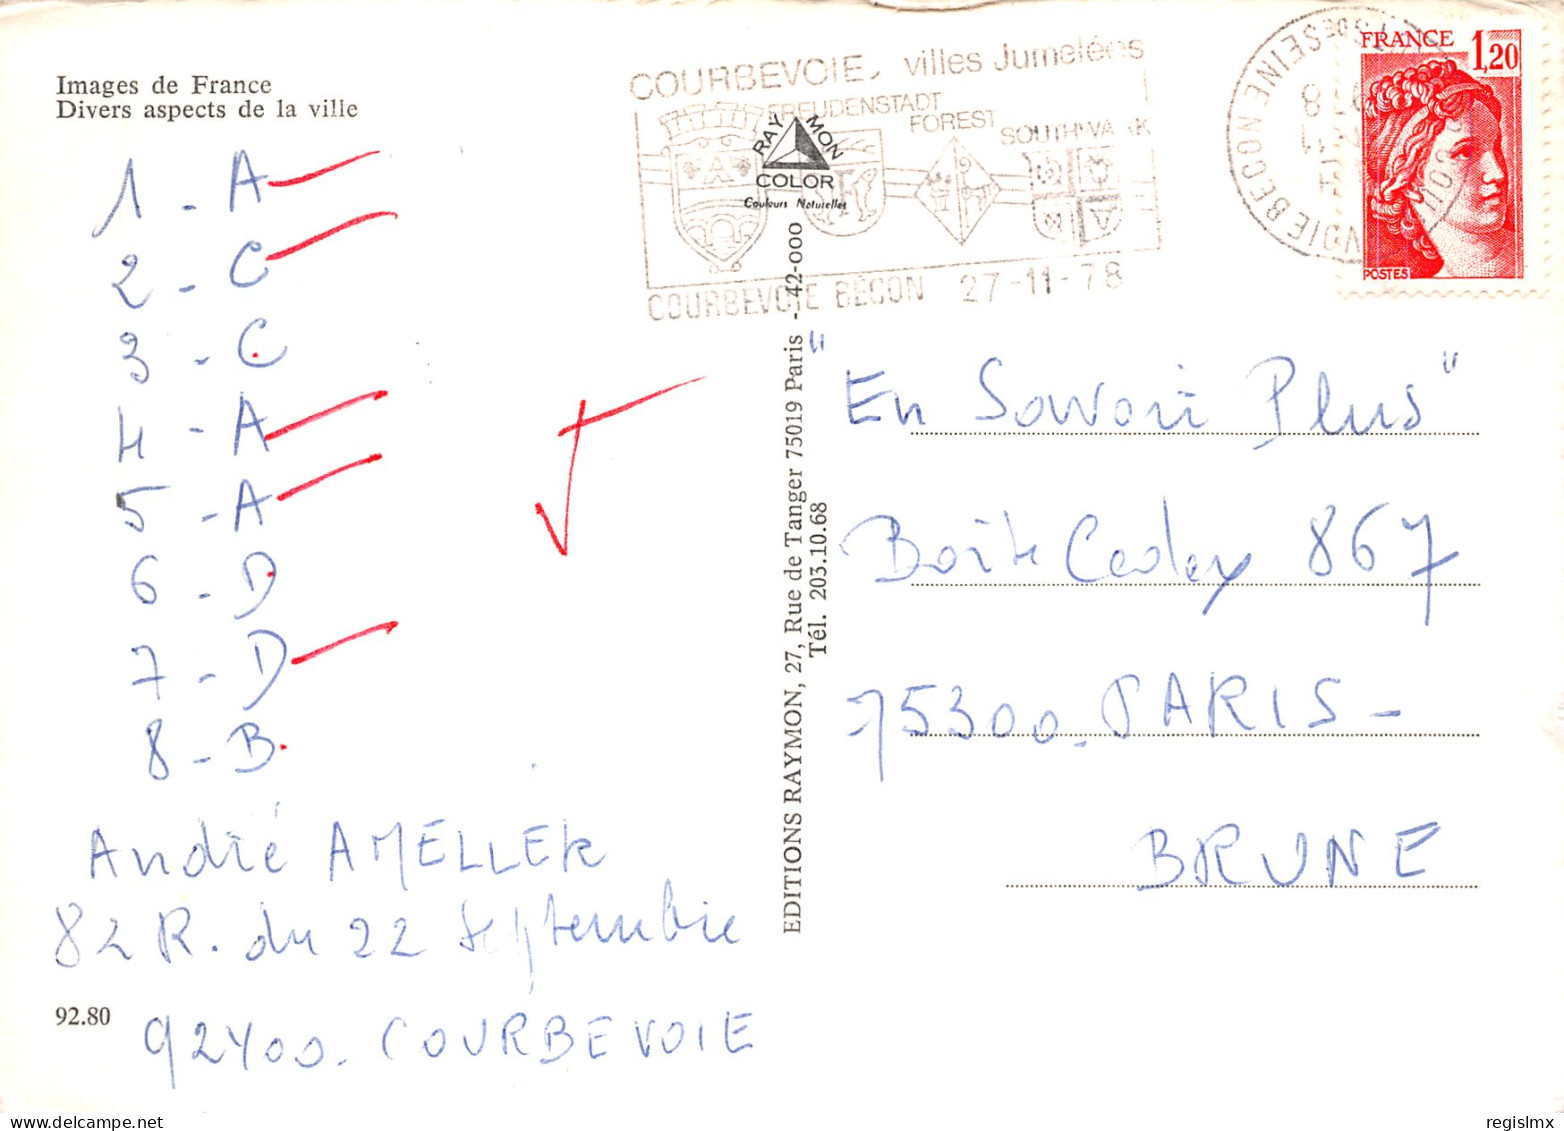 92-COURBEVOIE-N°2105-A/0303 - Courbevoie